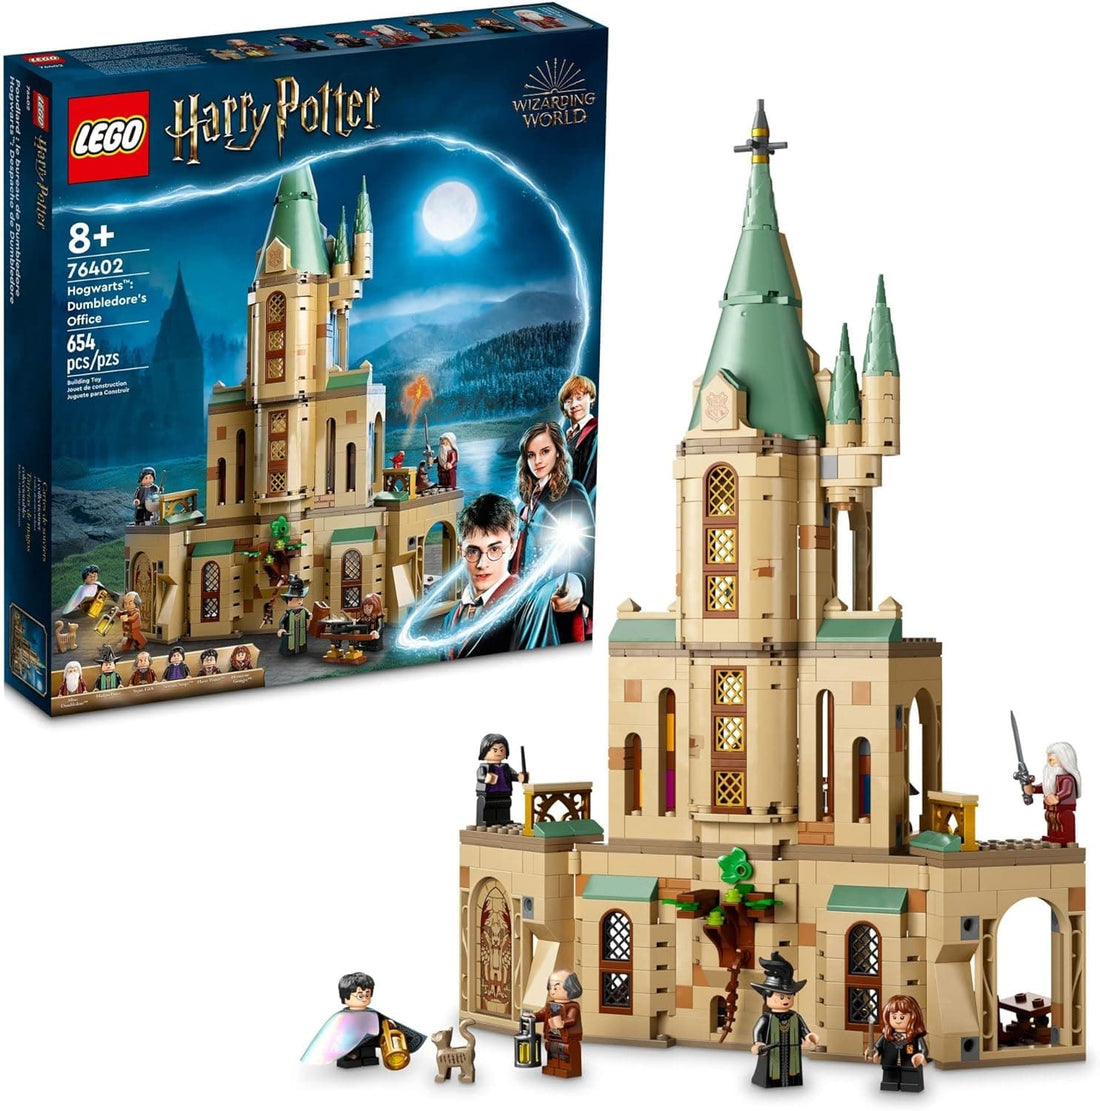 LEGO Harry Potter Hogwarts: Dumbledore’s Office Set with Sorting Hat, Sword of Gryffindor and 6 Minifigures - best price from Maltashopper.com 76402